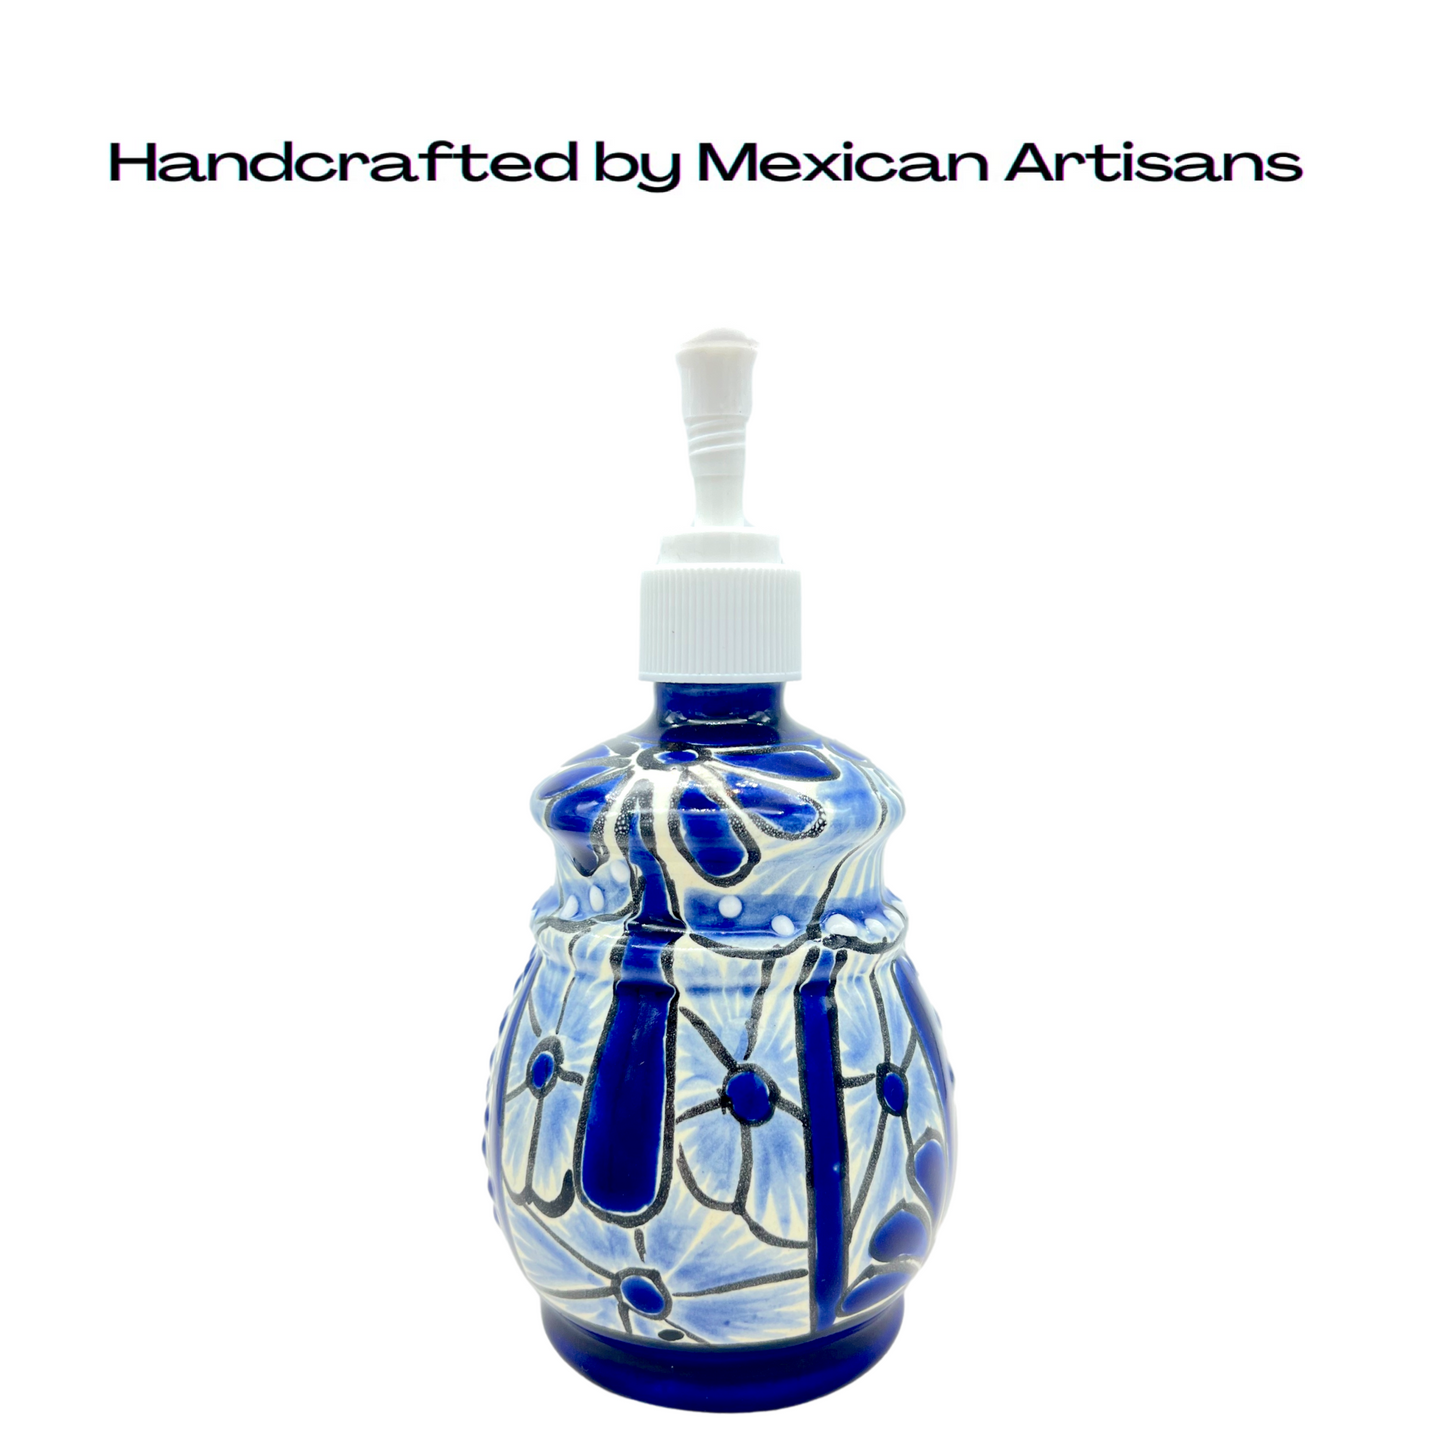 Hand-painted Talavera Ceramic Soap Dispenser in blue and white, a unique addition to kitchen or bathroom decor. handcrafted by mexican artisans